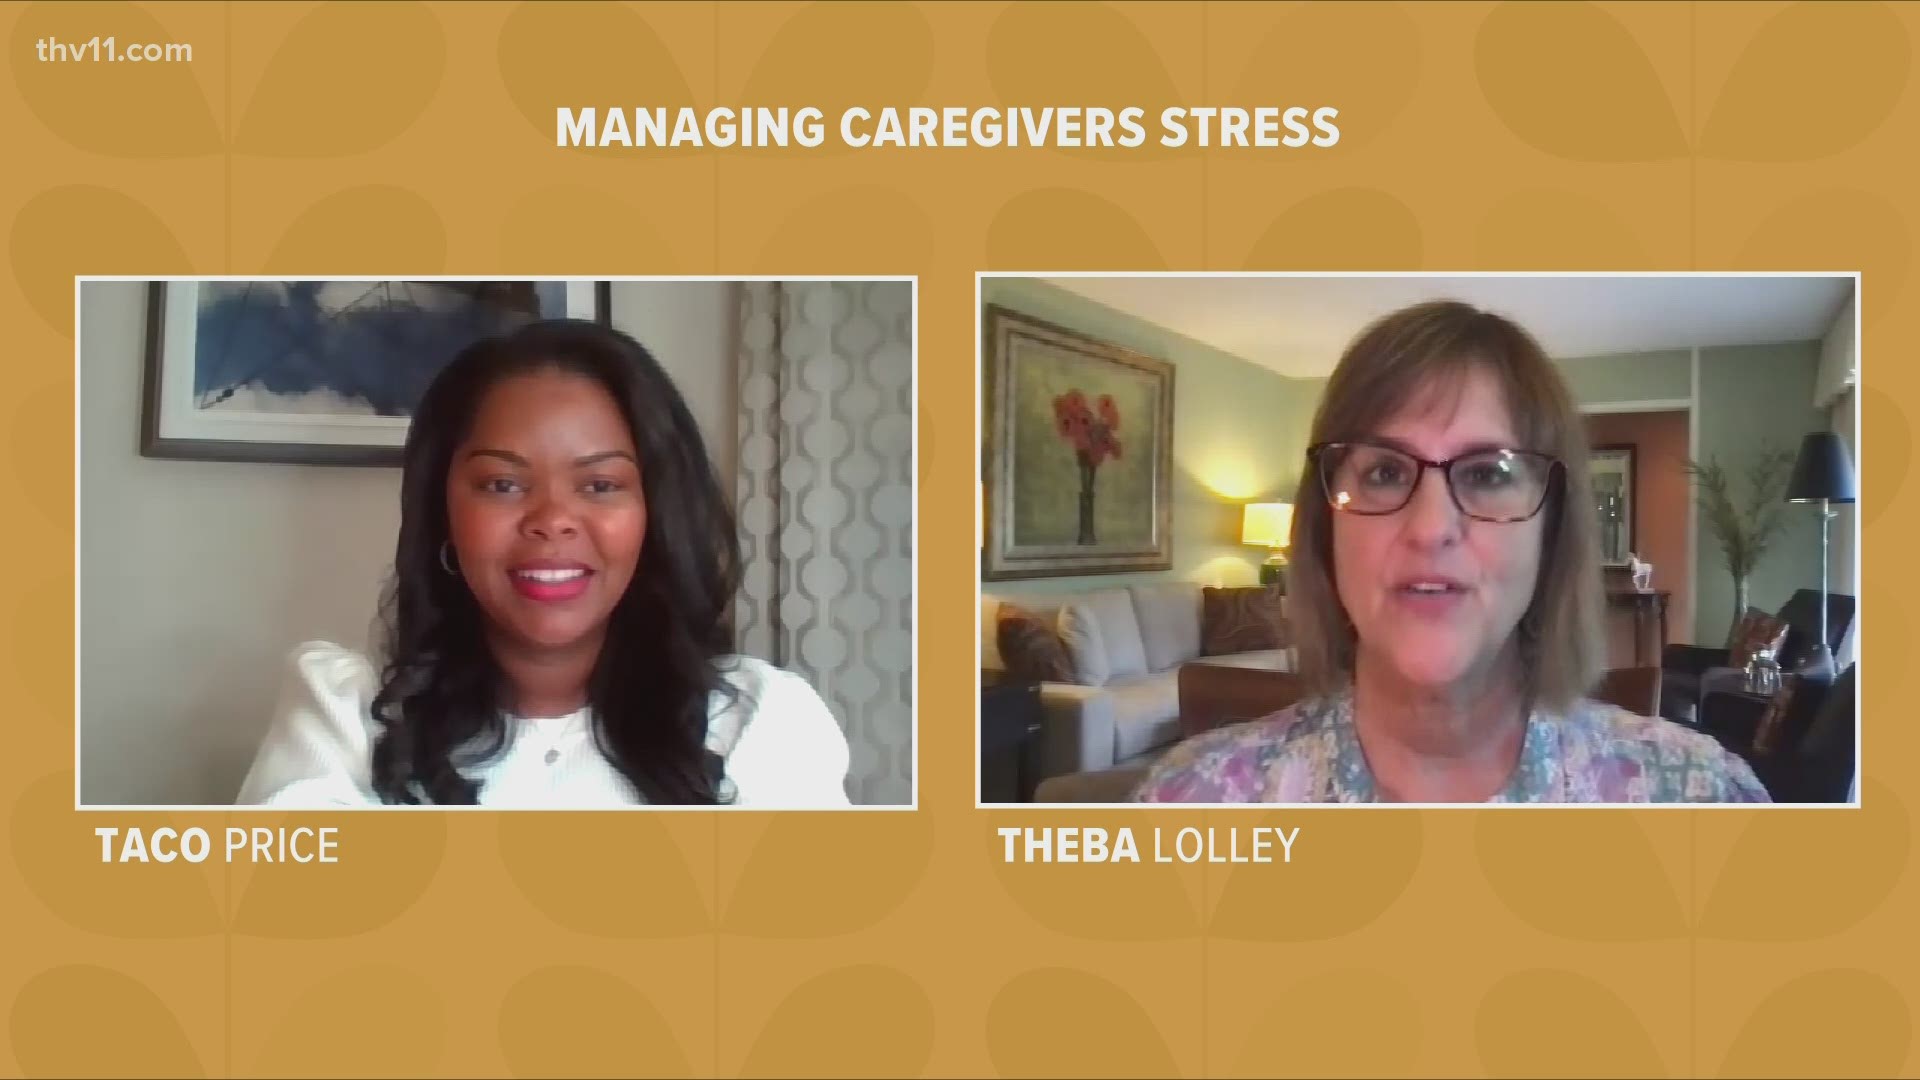 Taco Price joins Theba Lolley for a conversation about how to better manage caregiver’s stress.